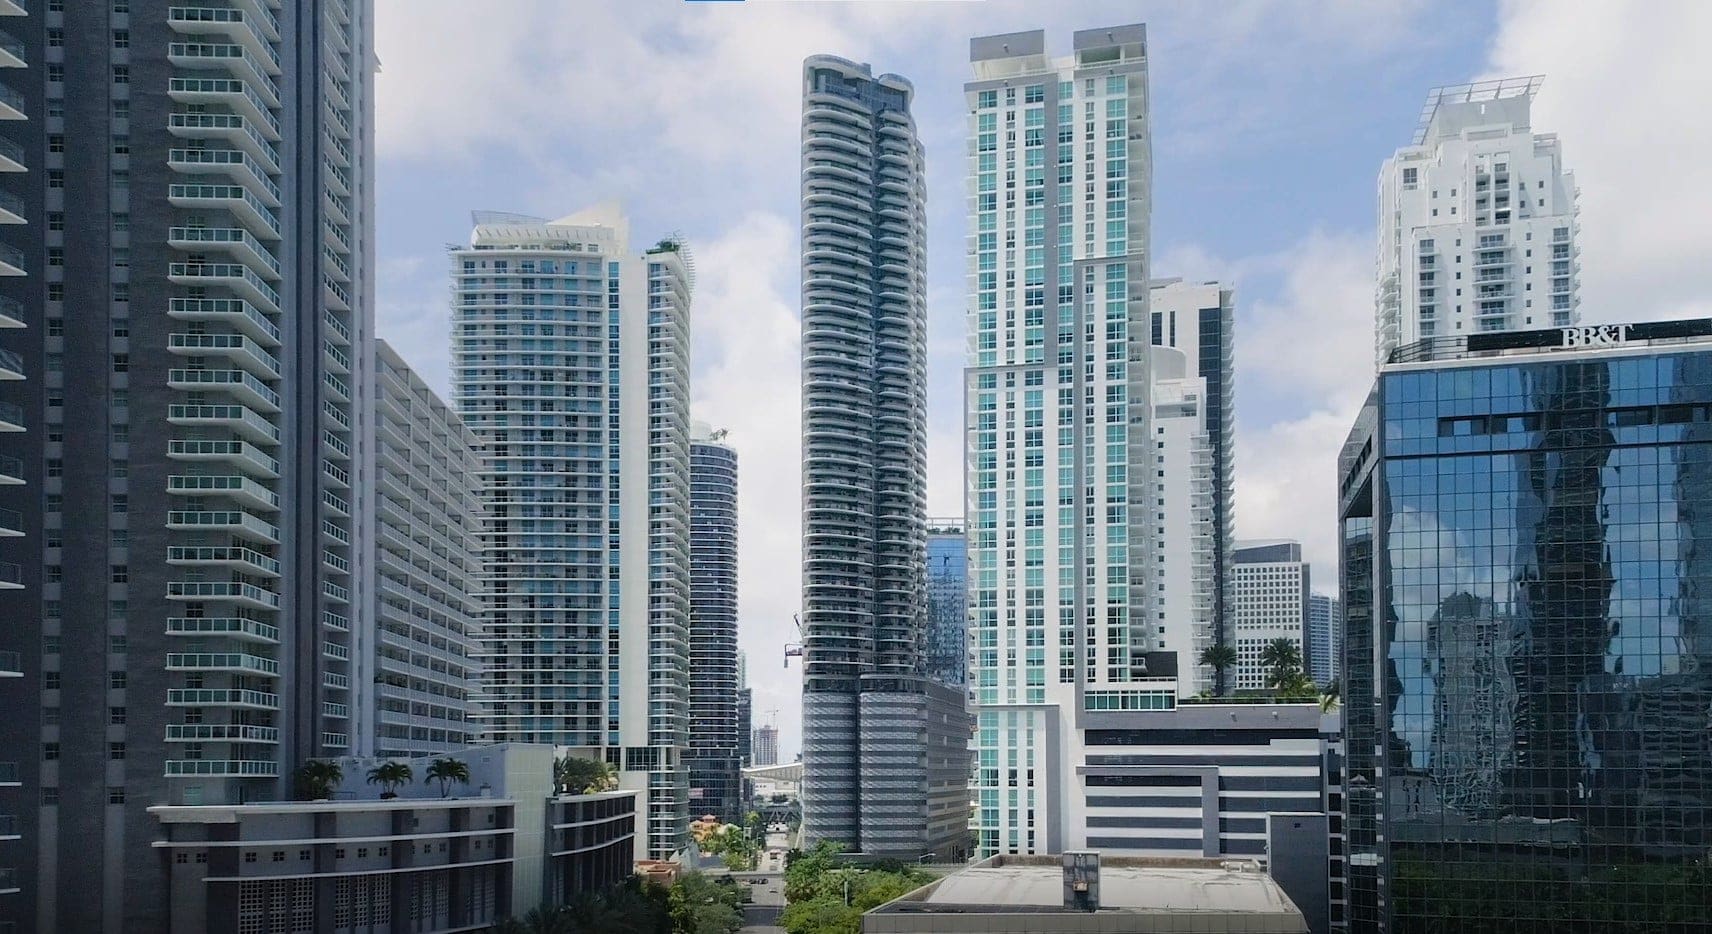 Brickell flatiron is a 64-story residential high rise in Miami, Florida.